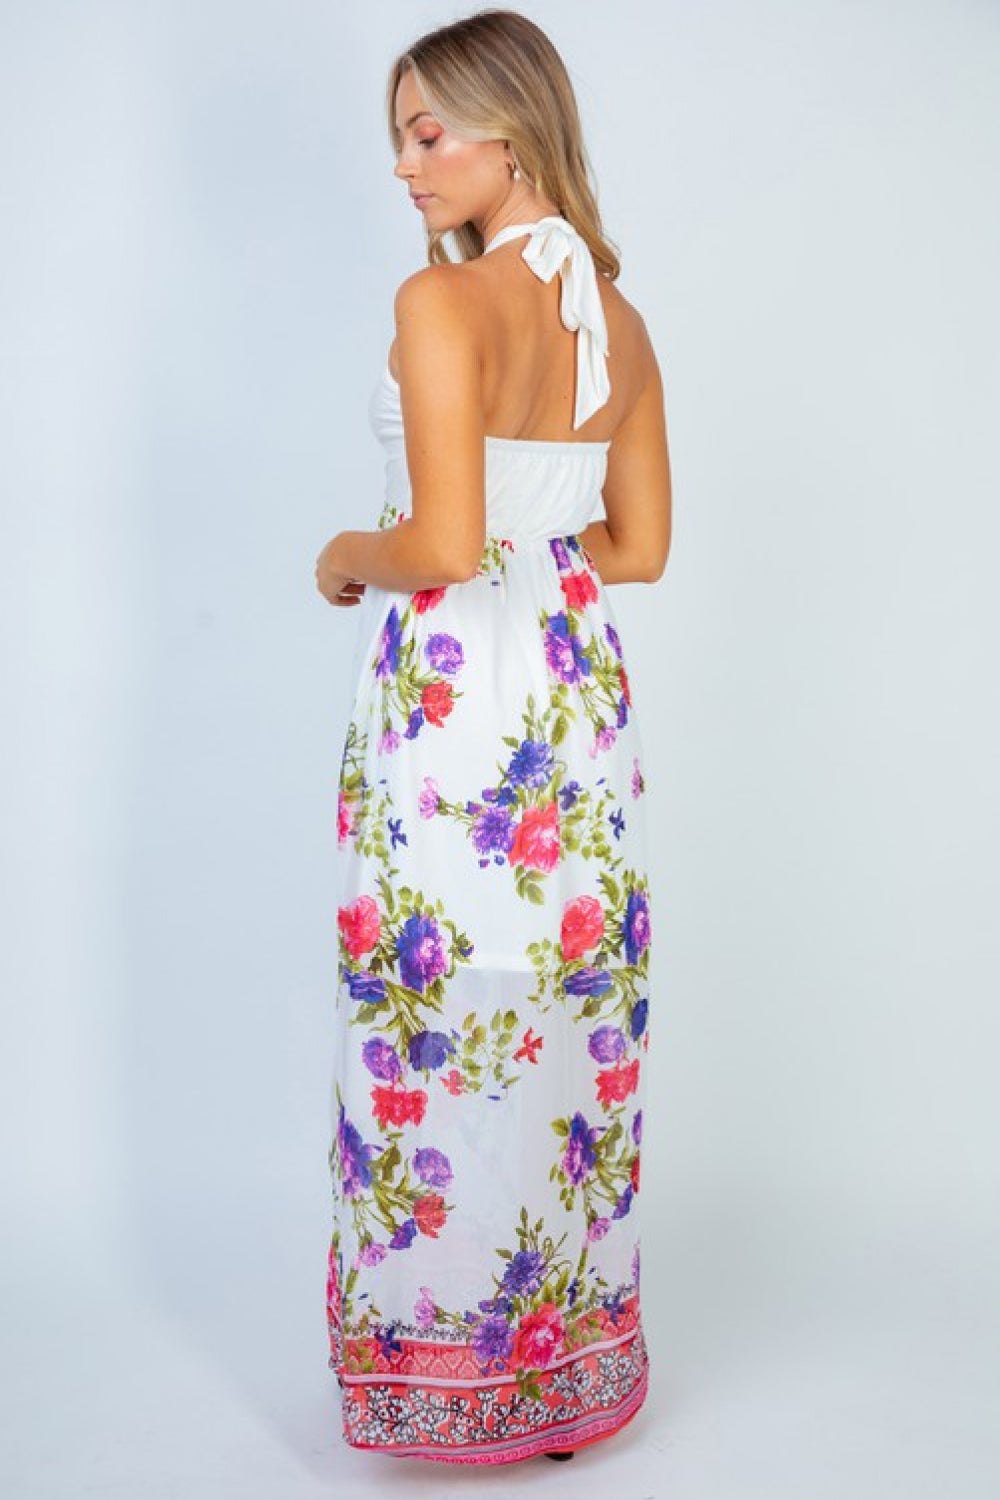 White Birch Flowers For Sale Full Size Floral Halter Dress | - CHANELIA